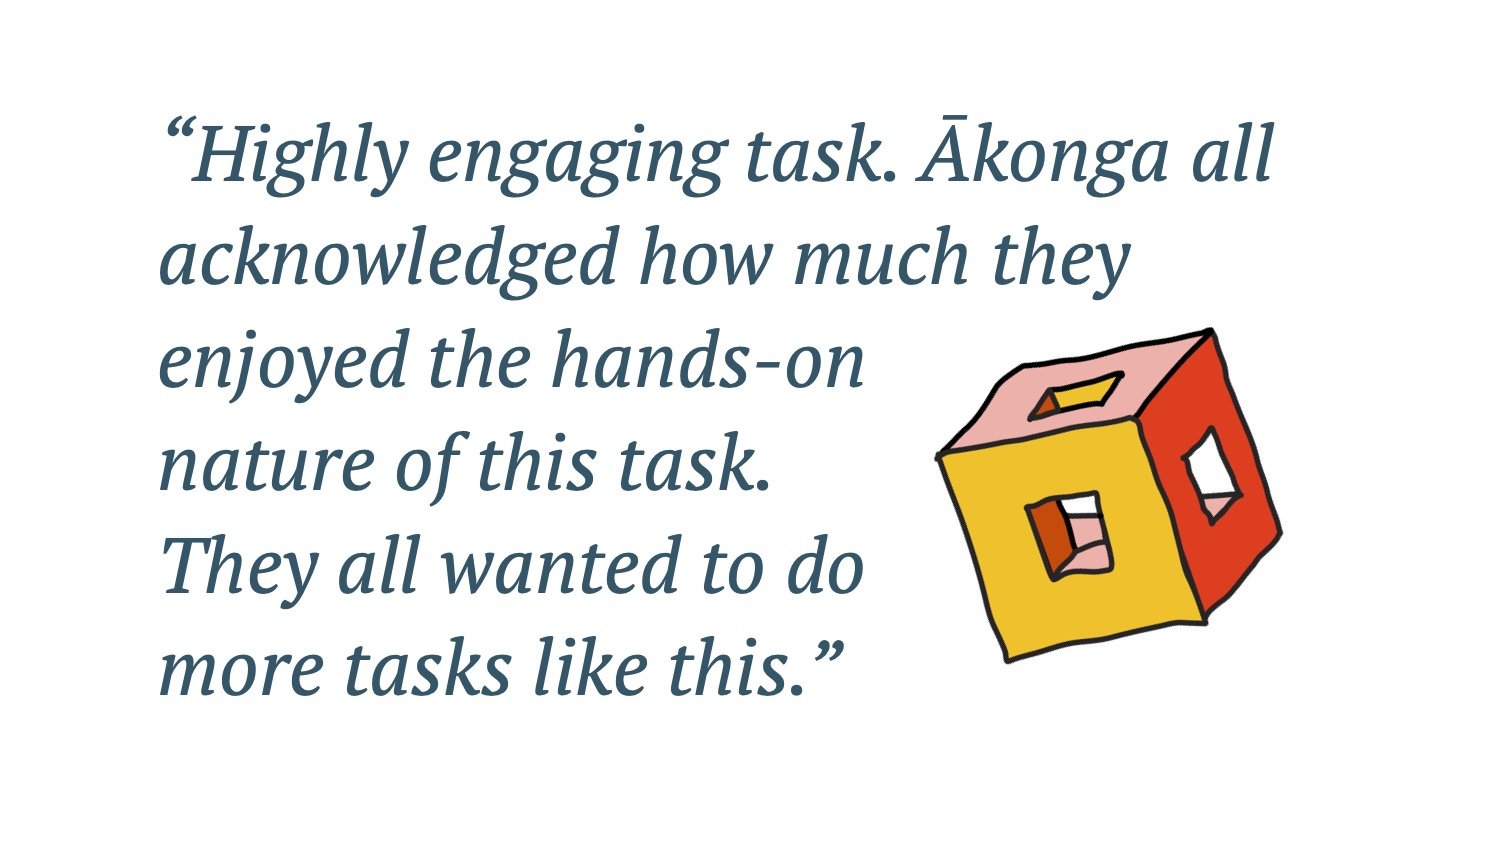 Quote: Highly engaging task. Ākonga all acknowledged how much they enjoyed the hands-on nature of this task. They all wanted to do more tasks like this.